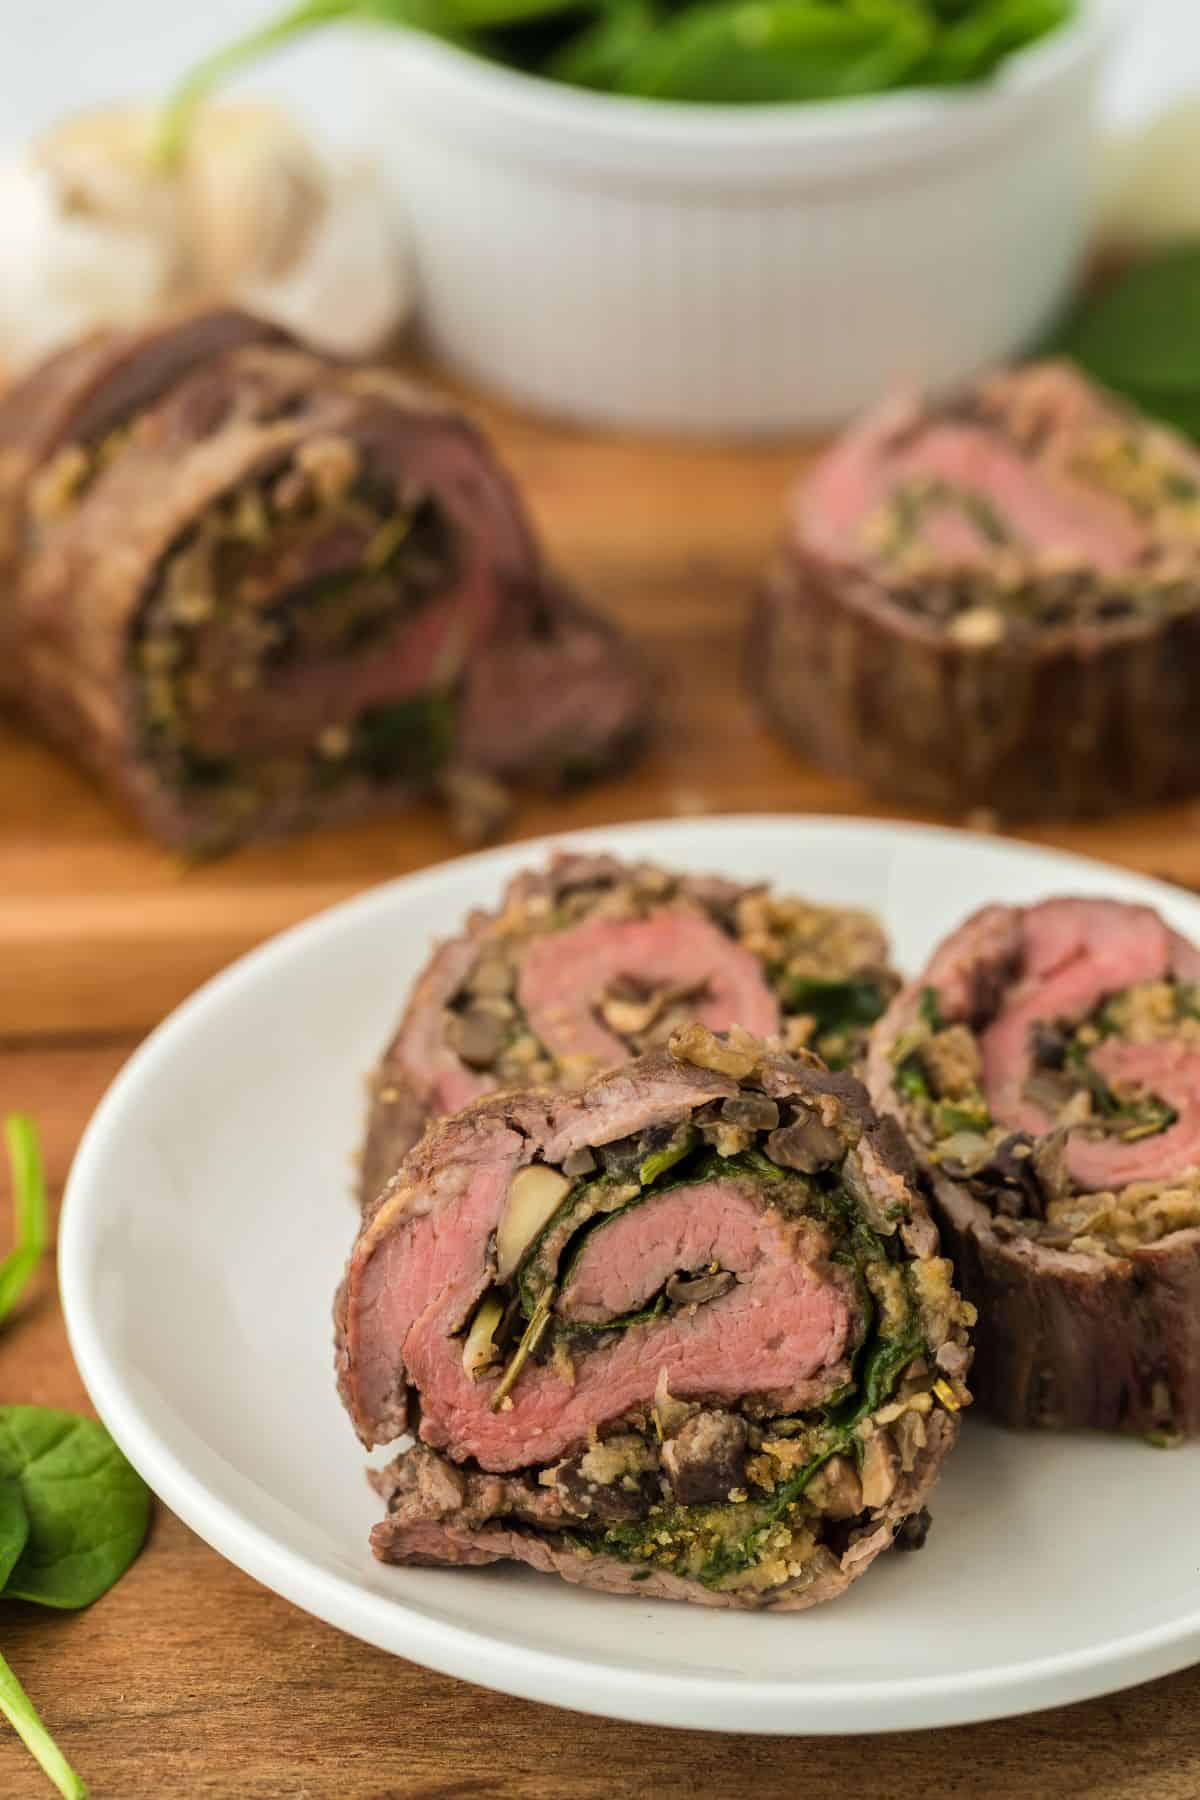 Closeup of slices of stuffed flank steak filled with a spinach and mushroom mixture on a white plate, with more steak rolls in the background